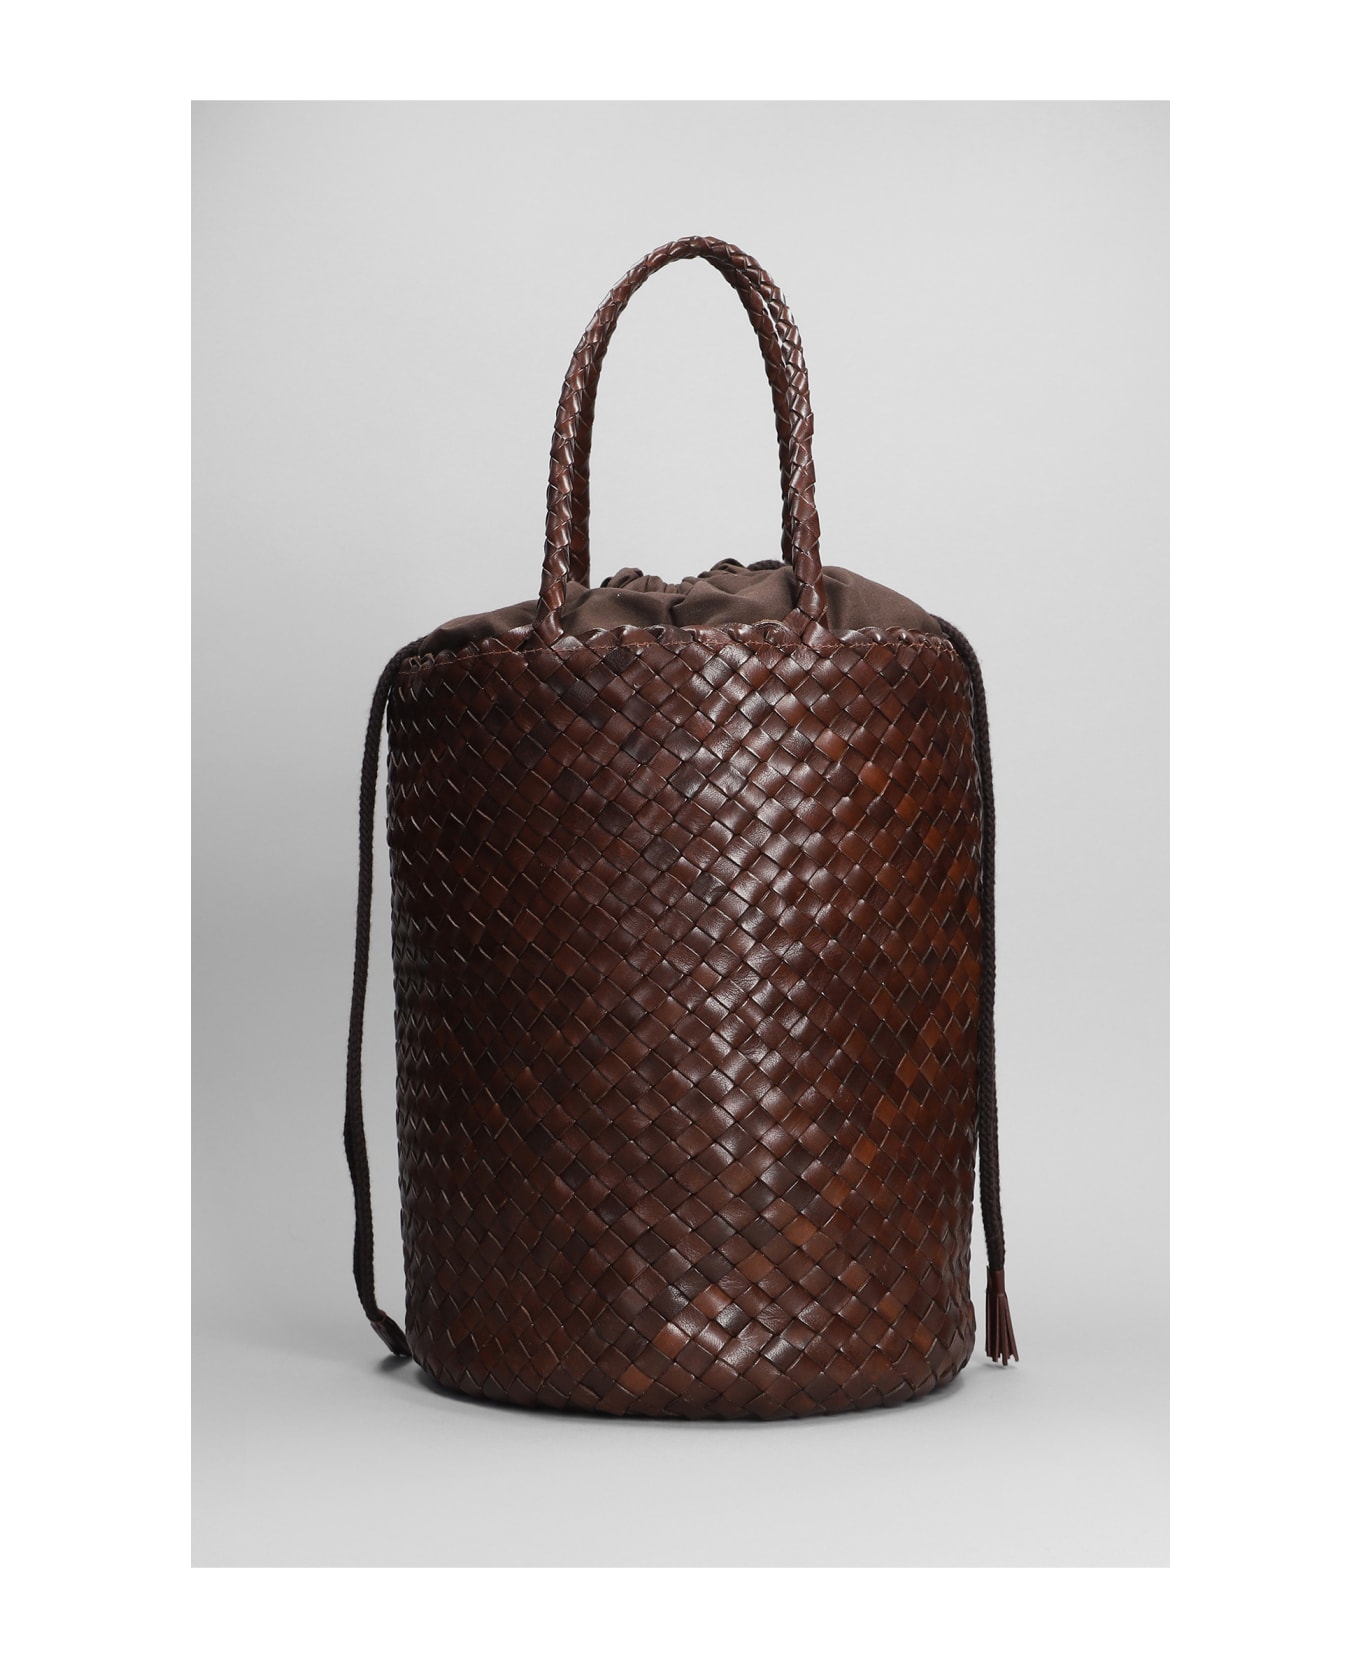 Dragon Diffusion Jacky Bucket Hand Bag In Brown Leather - brown